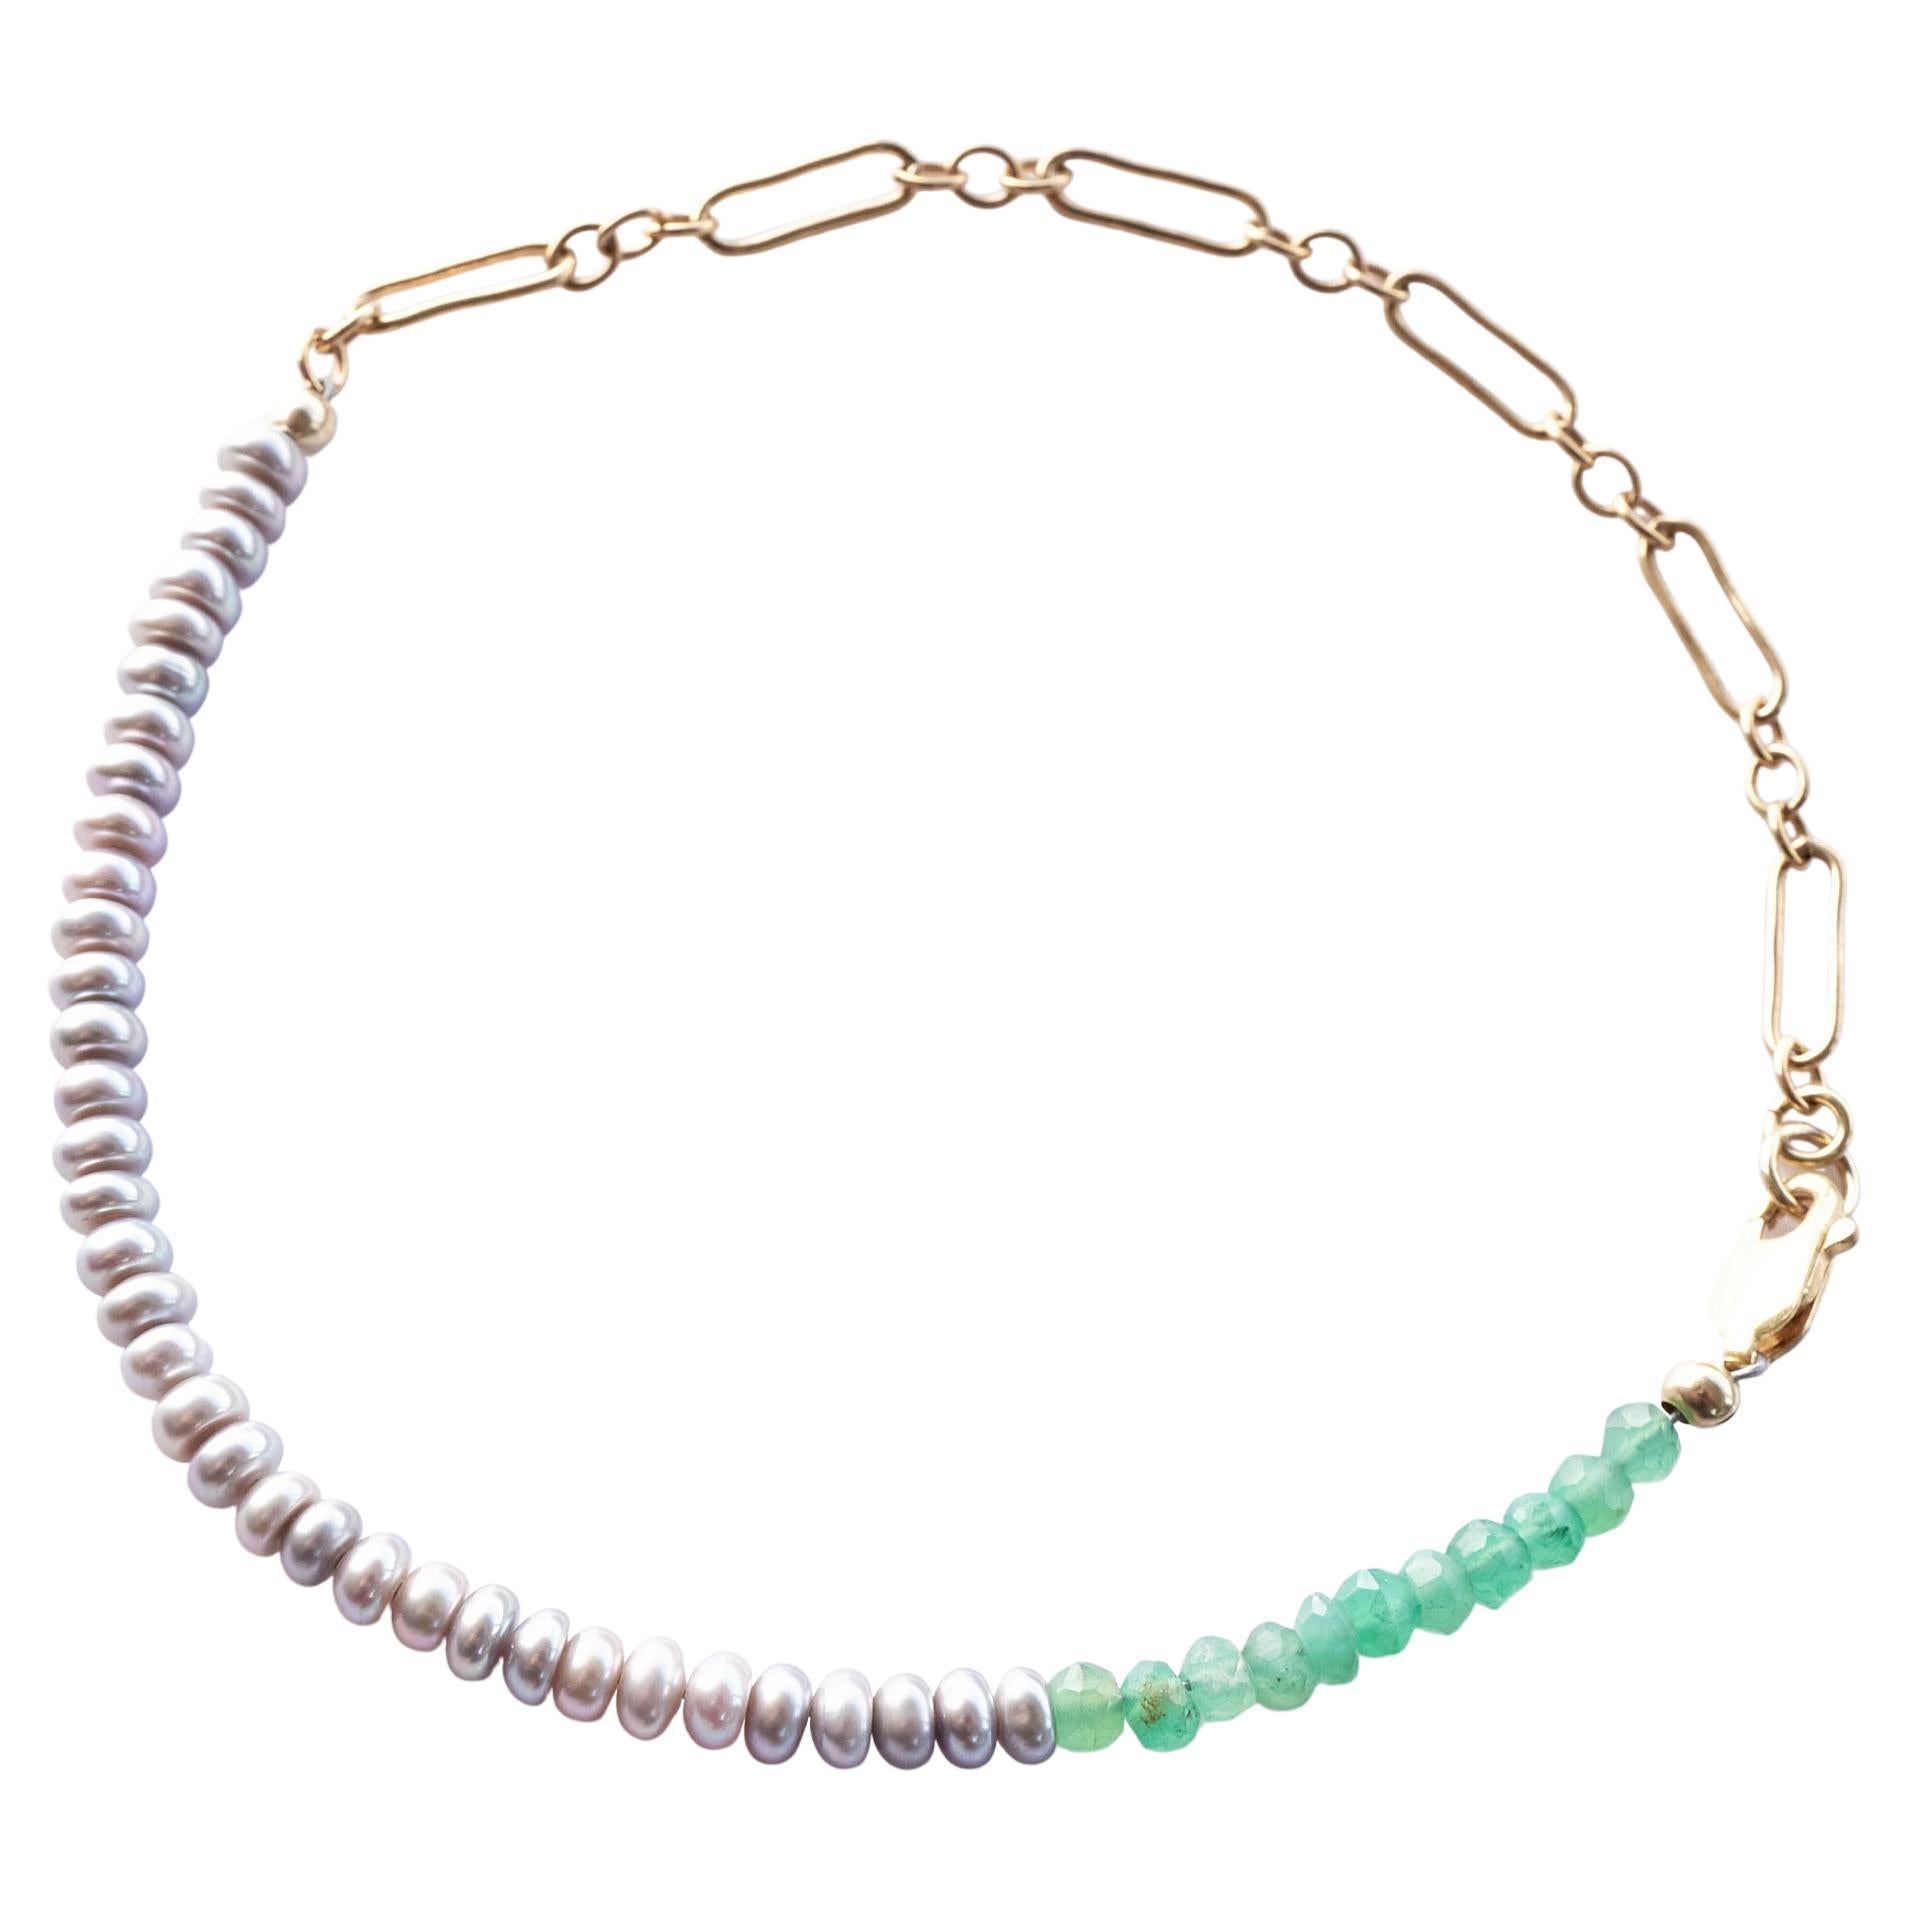 Pearl Chrysoprase Bead Bracelet Gold Filled Chain J Dauphin For Sale